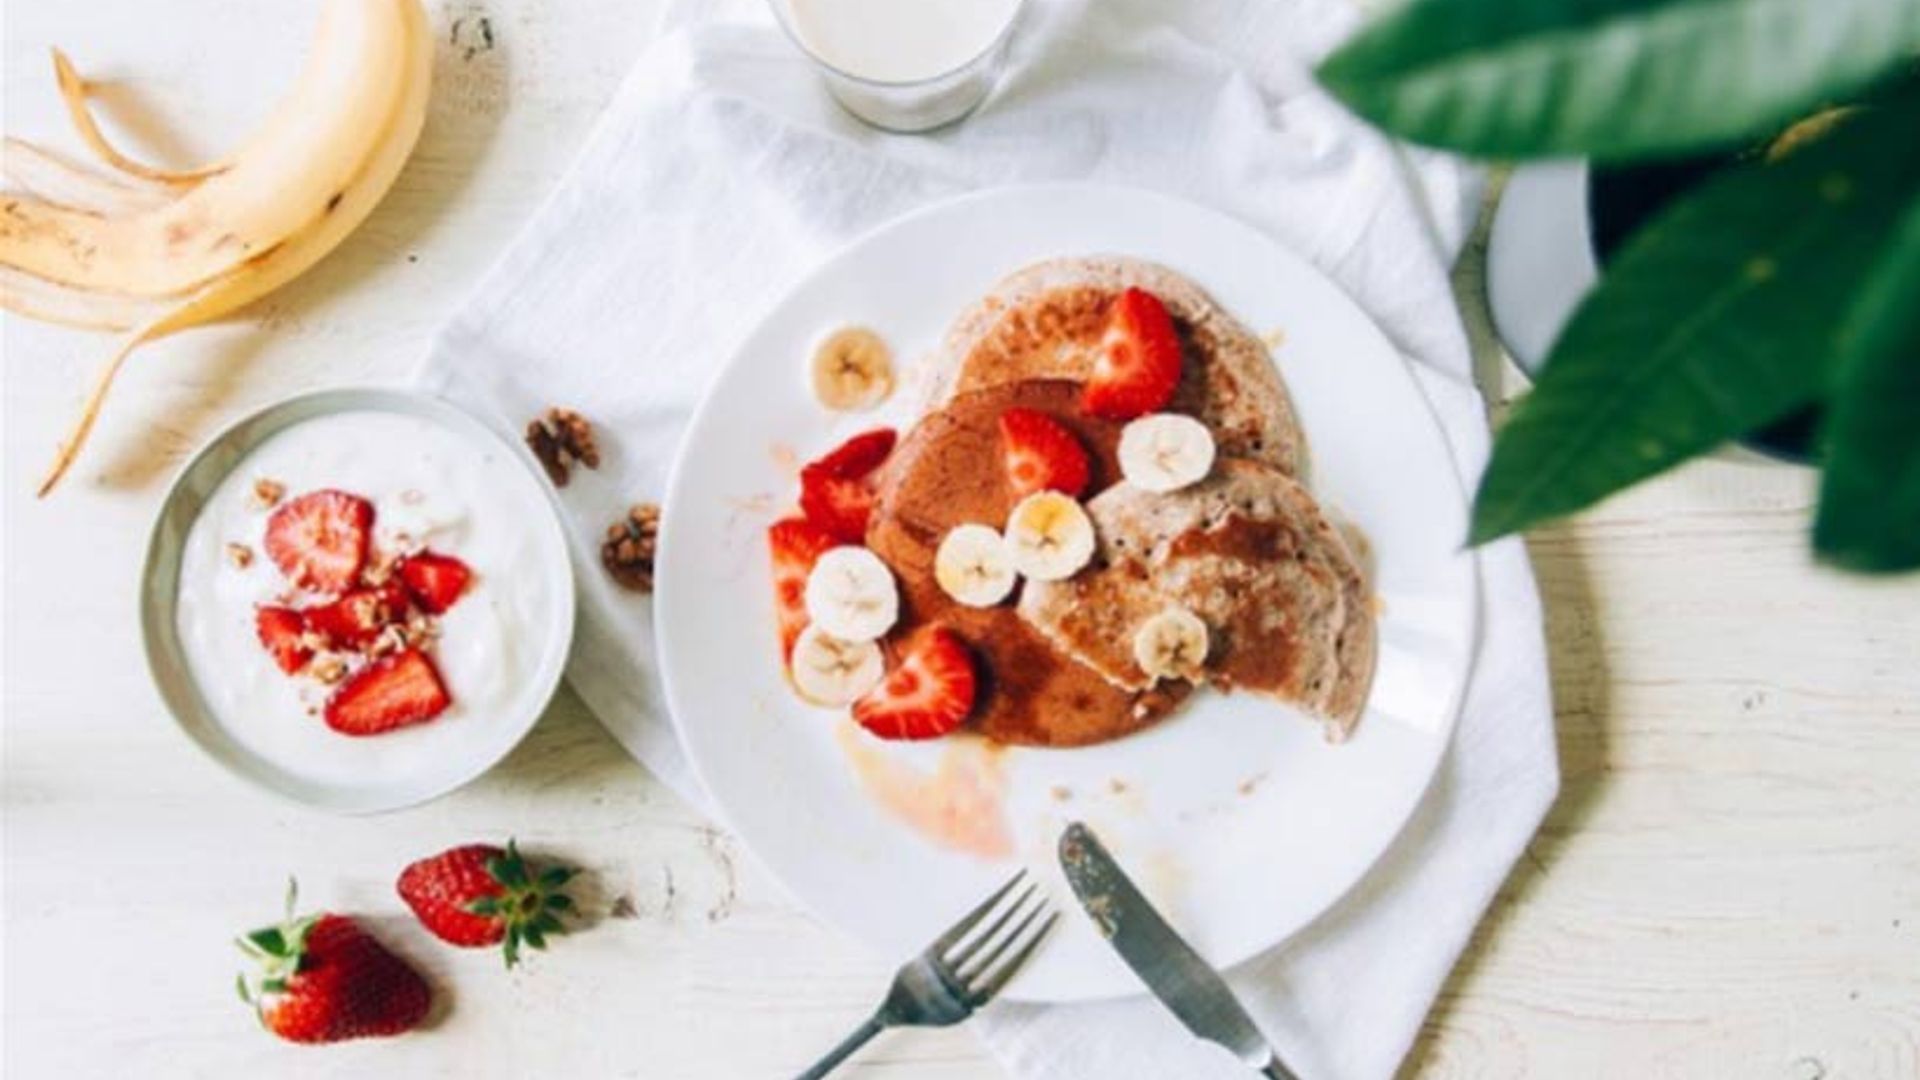 5 top tips to take amazing food photos for Instagram